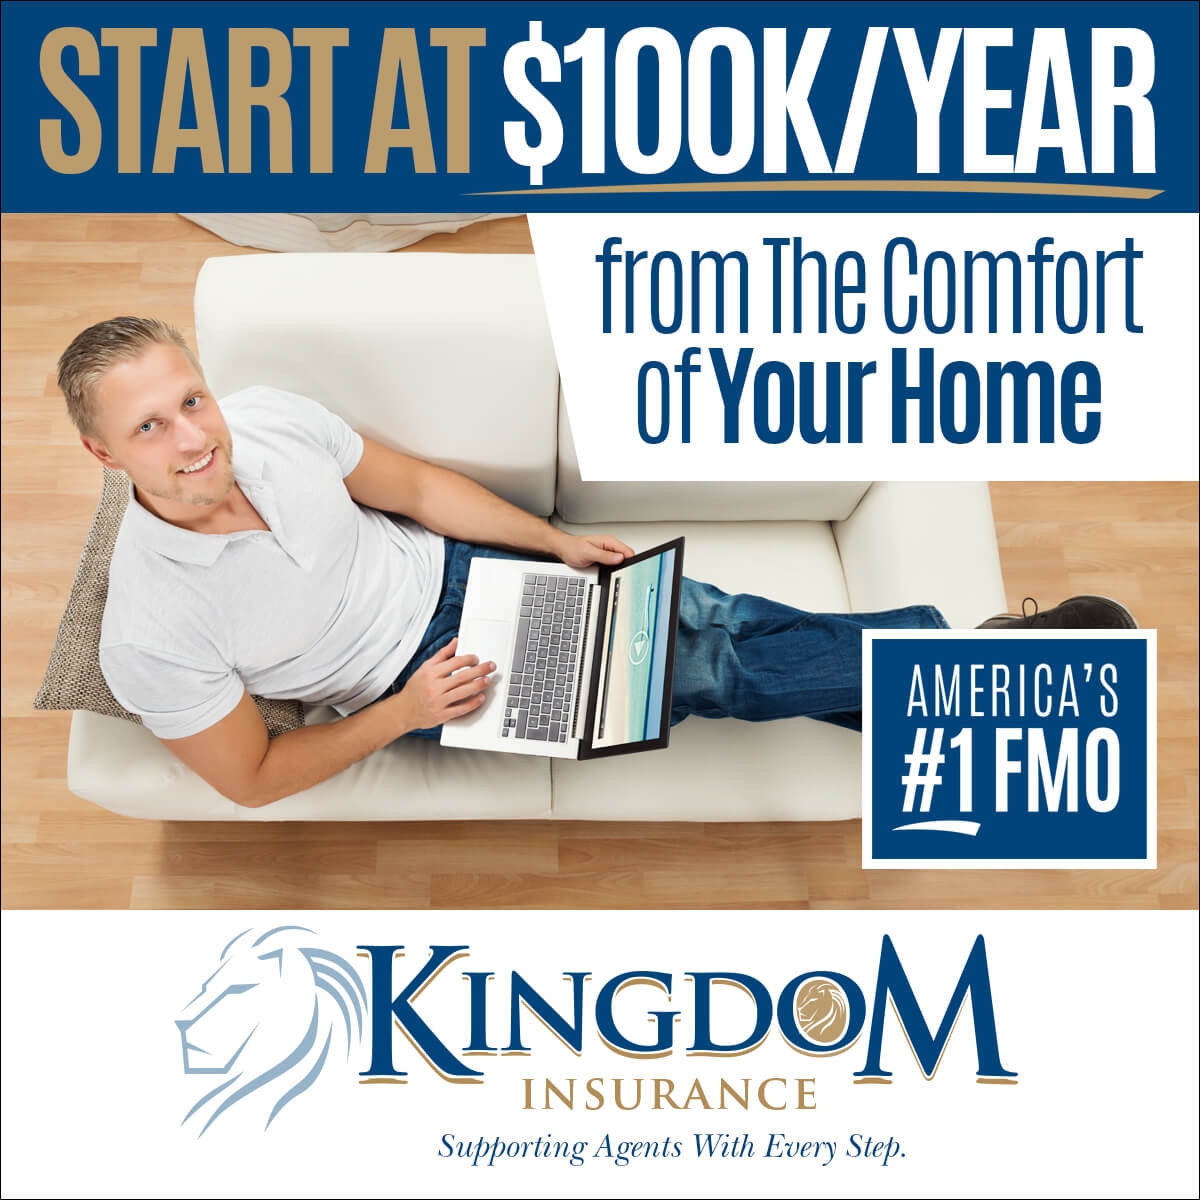 Start earning $100,000 per year in the comfort of your own home!